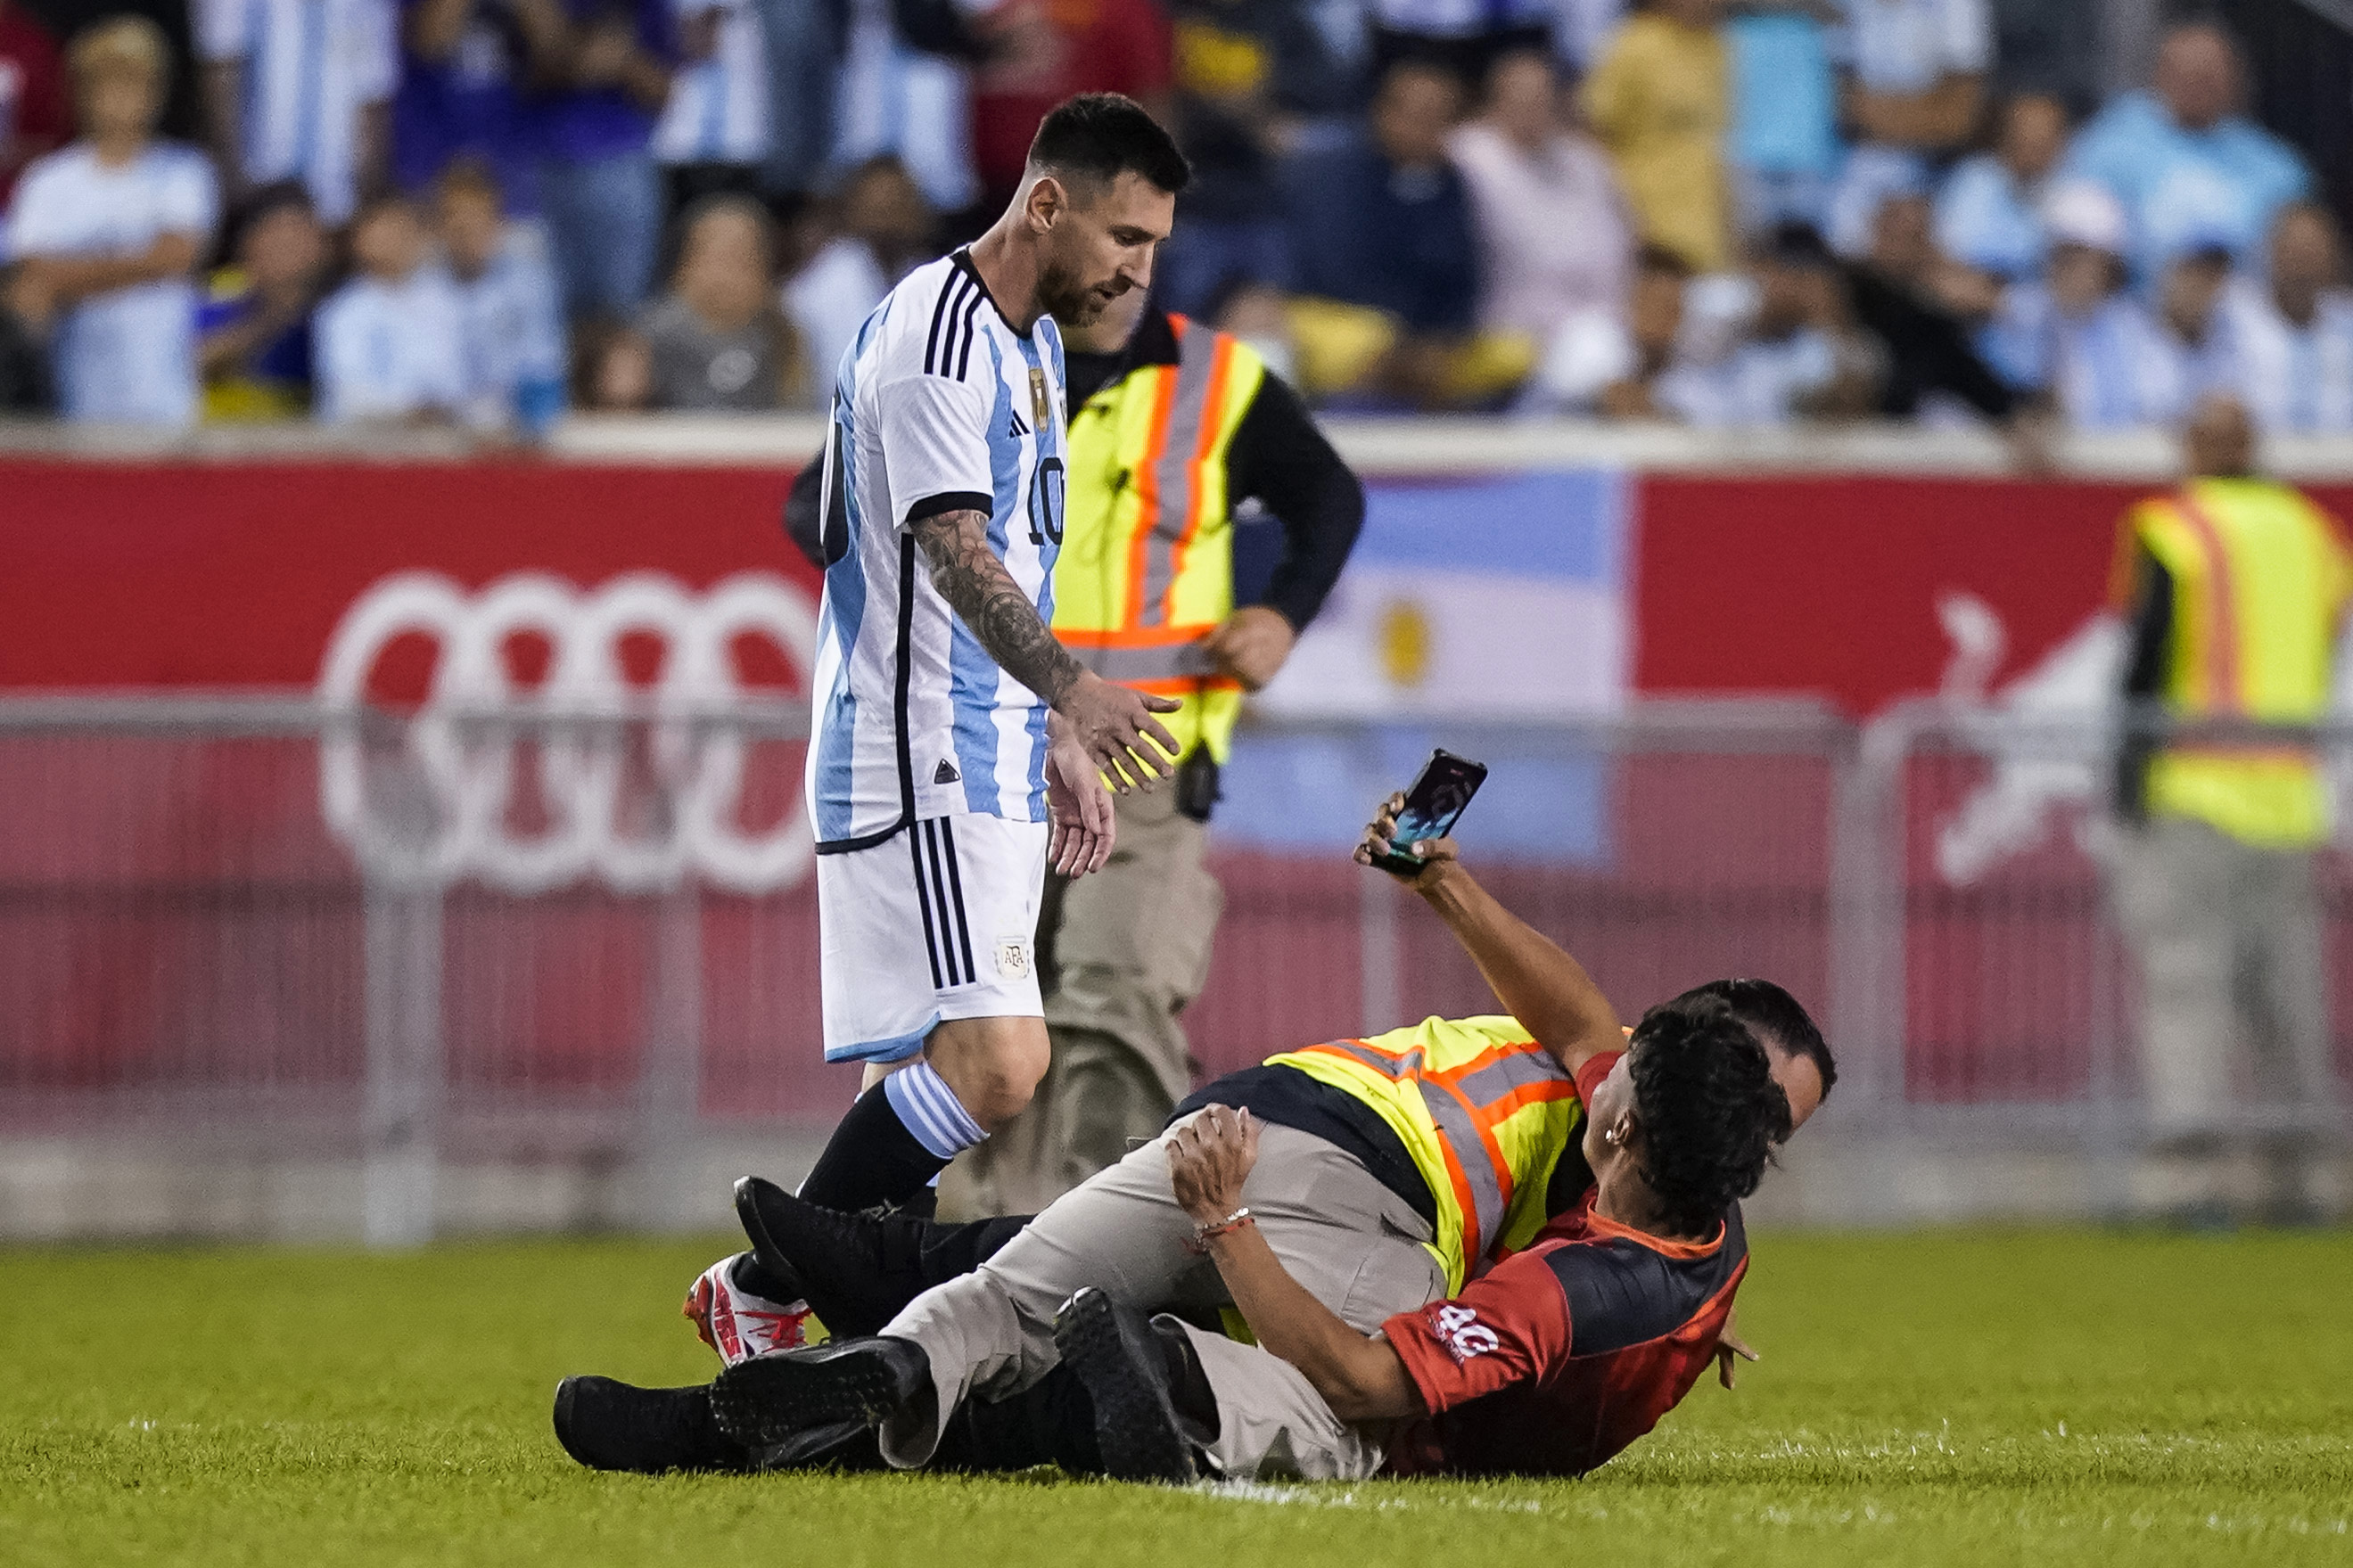 A fan is tackled as he tries to take a picture of Argentina's Lionel Messi.